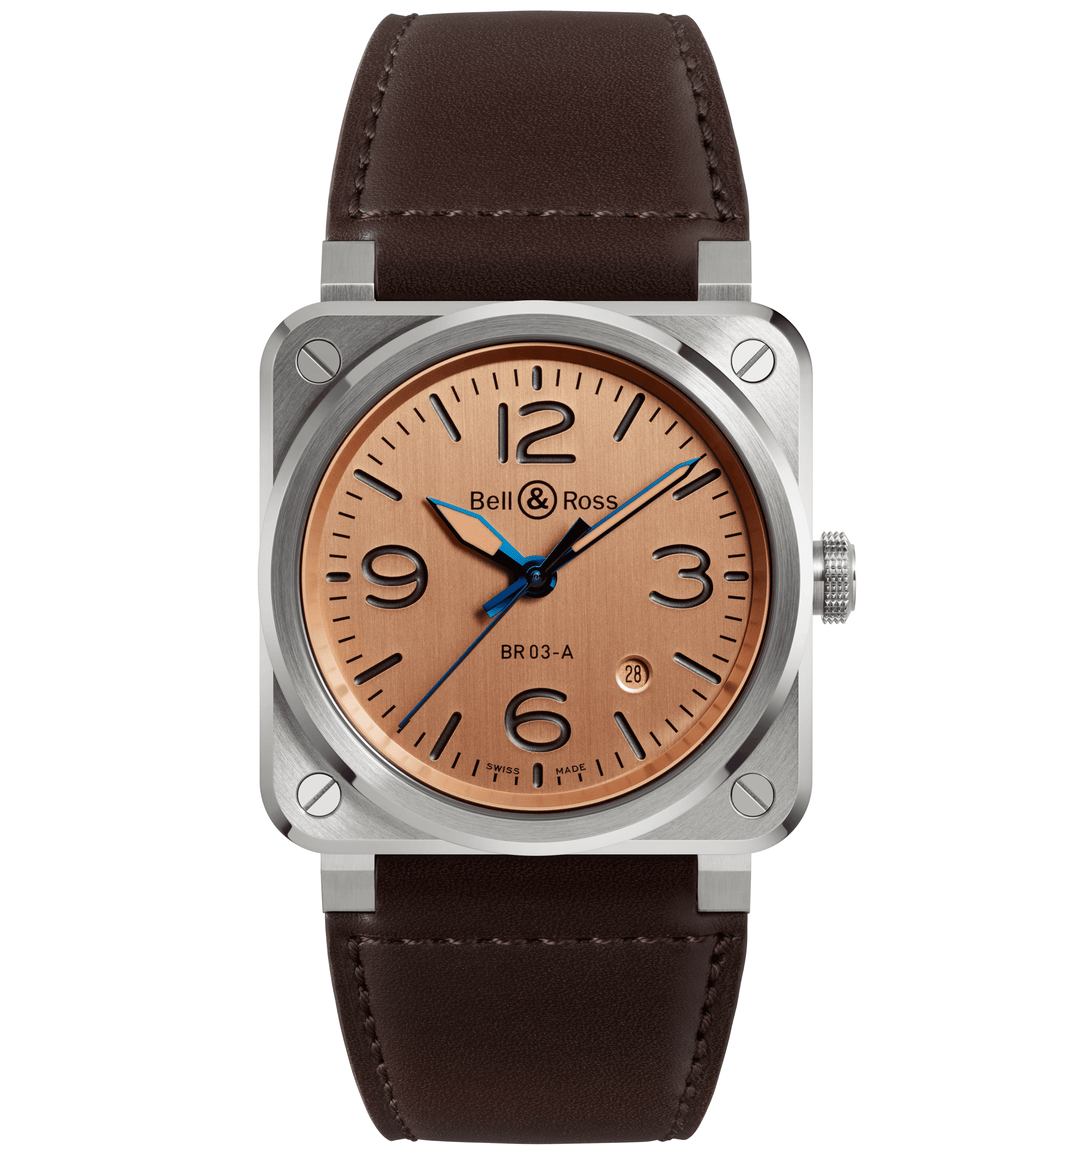 NEW BR 03 COPPER - Bell & Ross - Montre - Les Champs d'Or